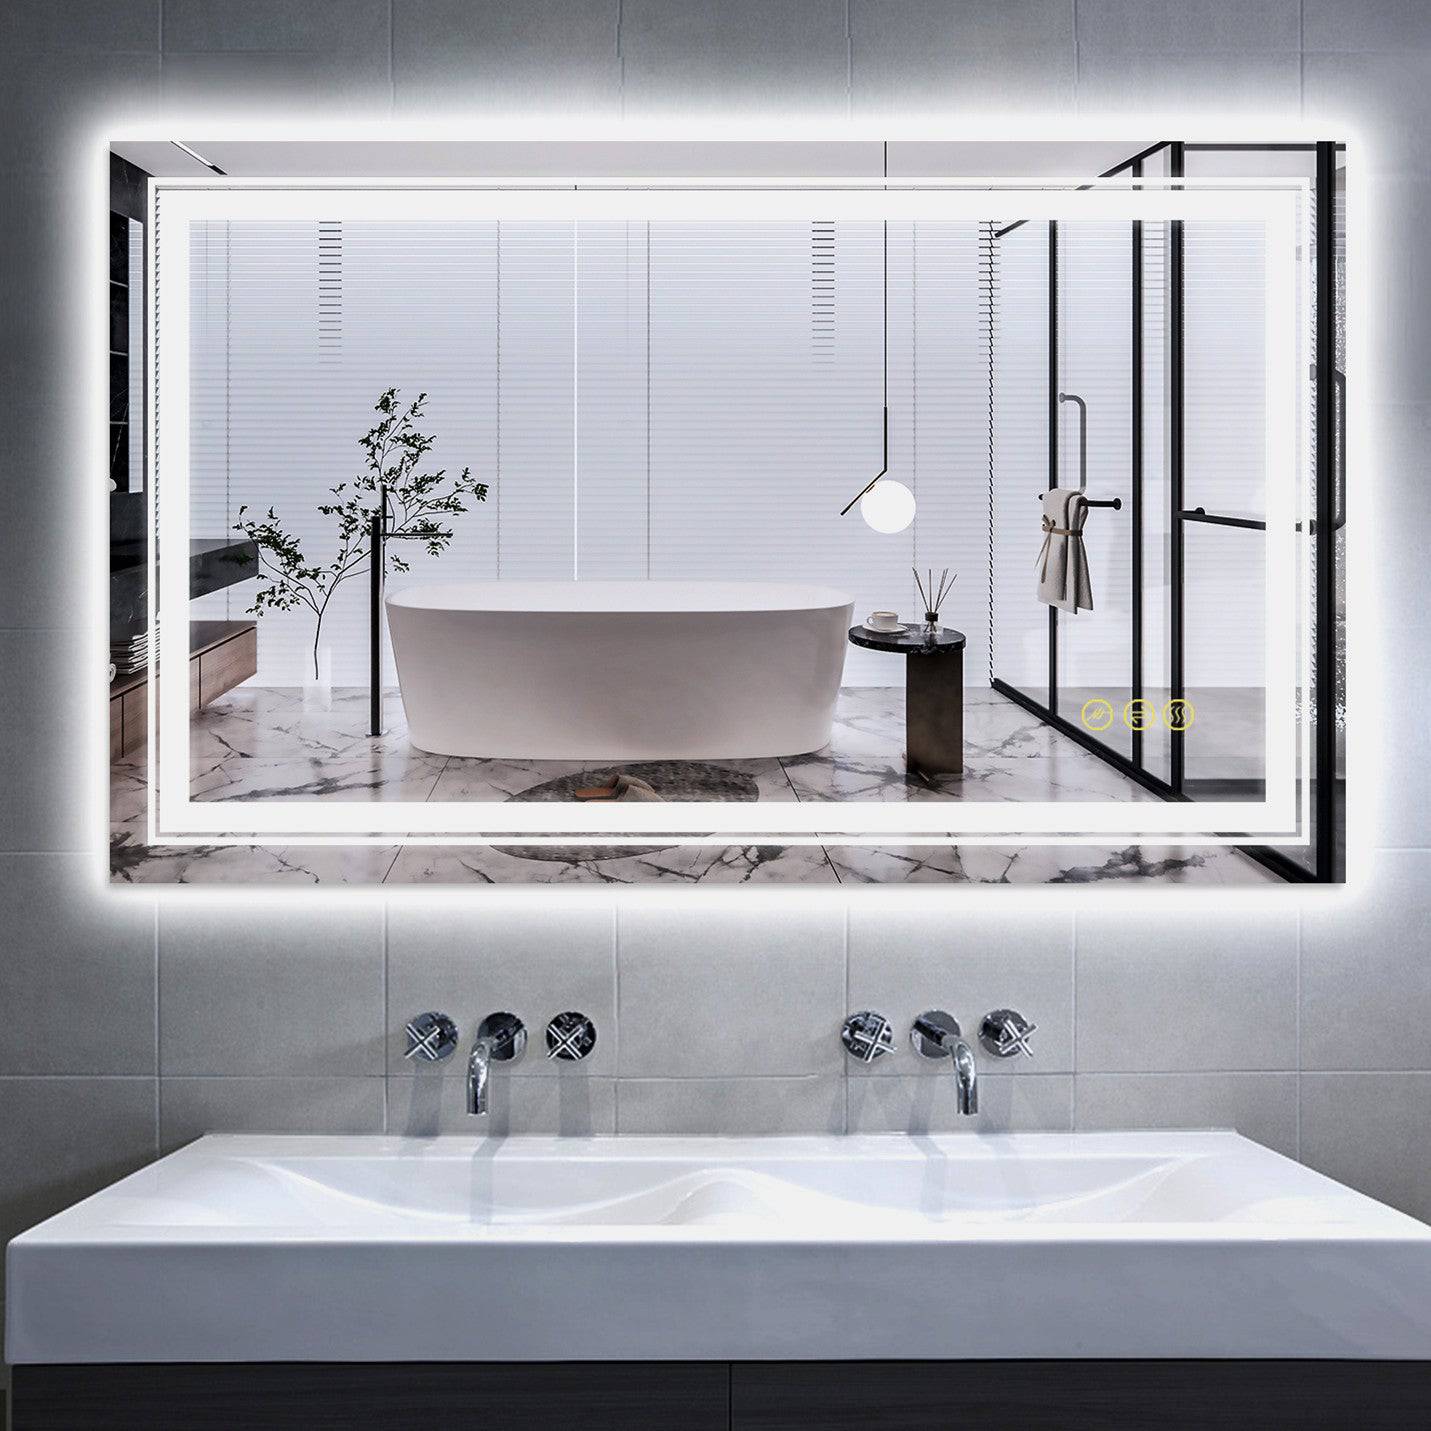 ELL Shine Series - LED Mirror with Heating Pad, Color Temperature Changing, Dimmable Lighting, and UL Certified Electronics for Bathroom | 5mm Tempered Glass, IP44 Rated, Hardwired with Plug | Vertical or Horizontal Mounting - Eco LED Lightings 